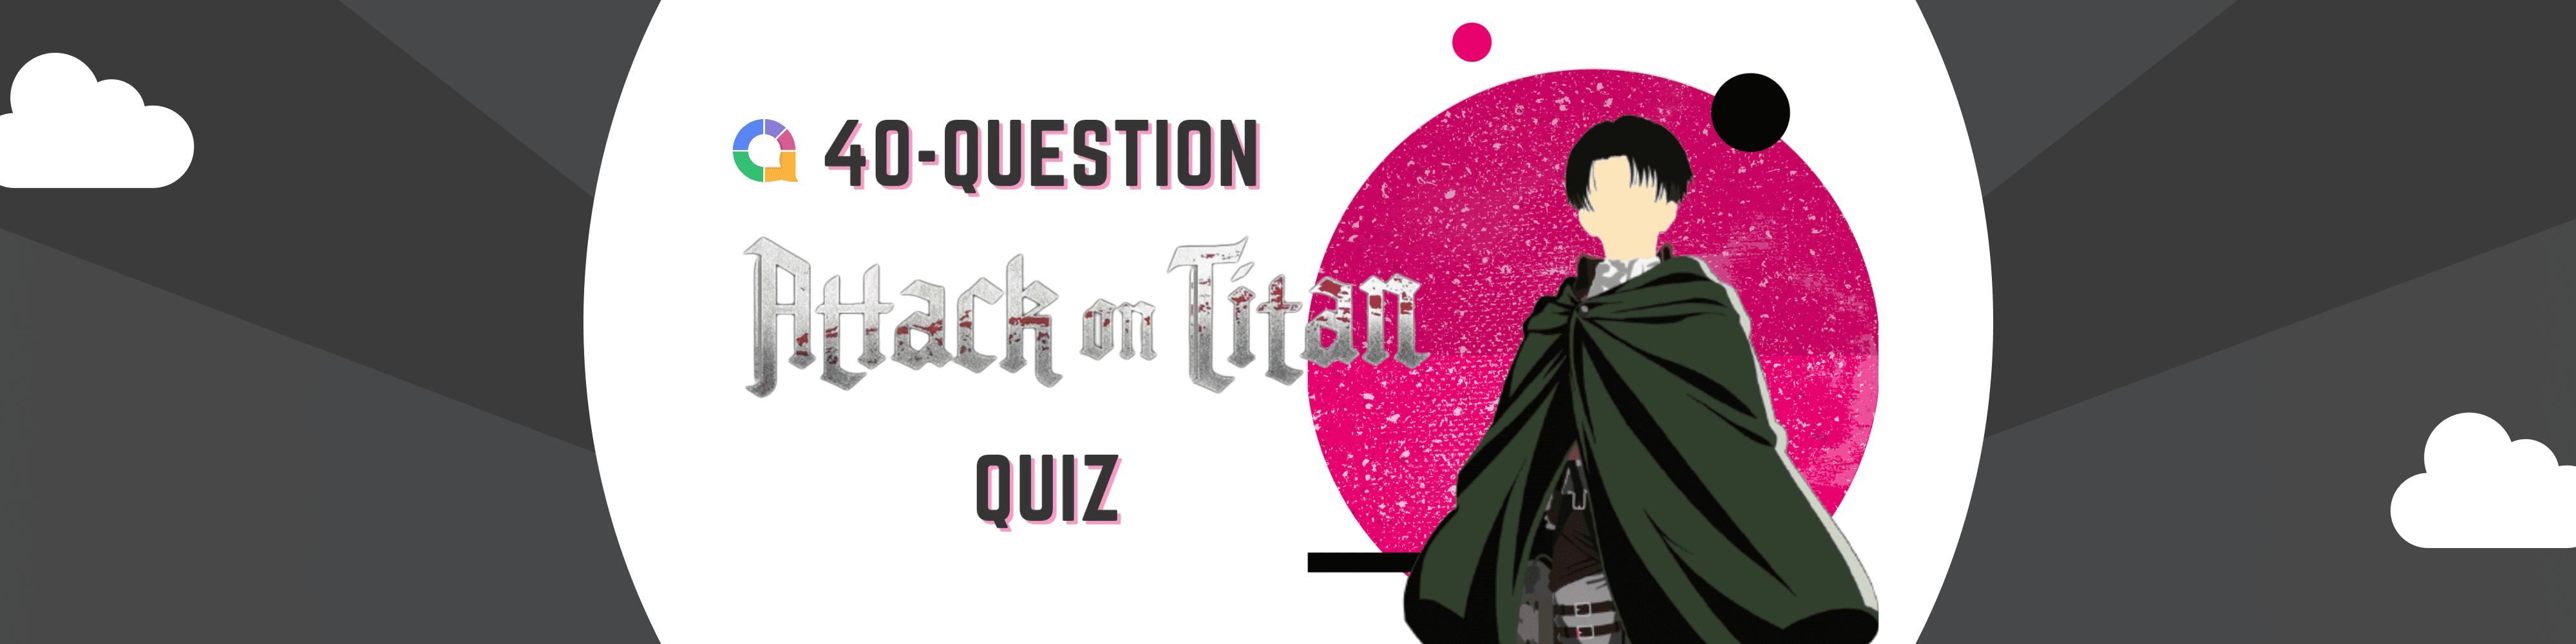 Attack on Titan Quiz: 40 Free Questions with Answers Even Armin Couldn’t Ace!